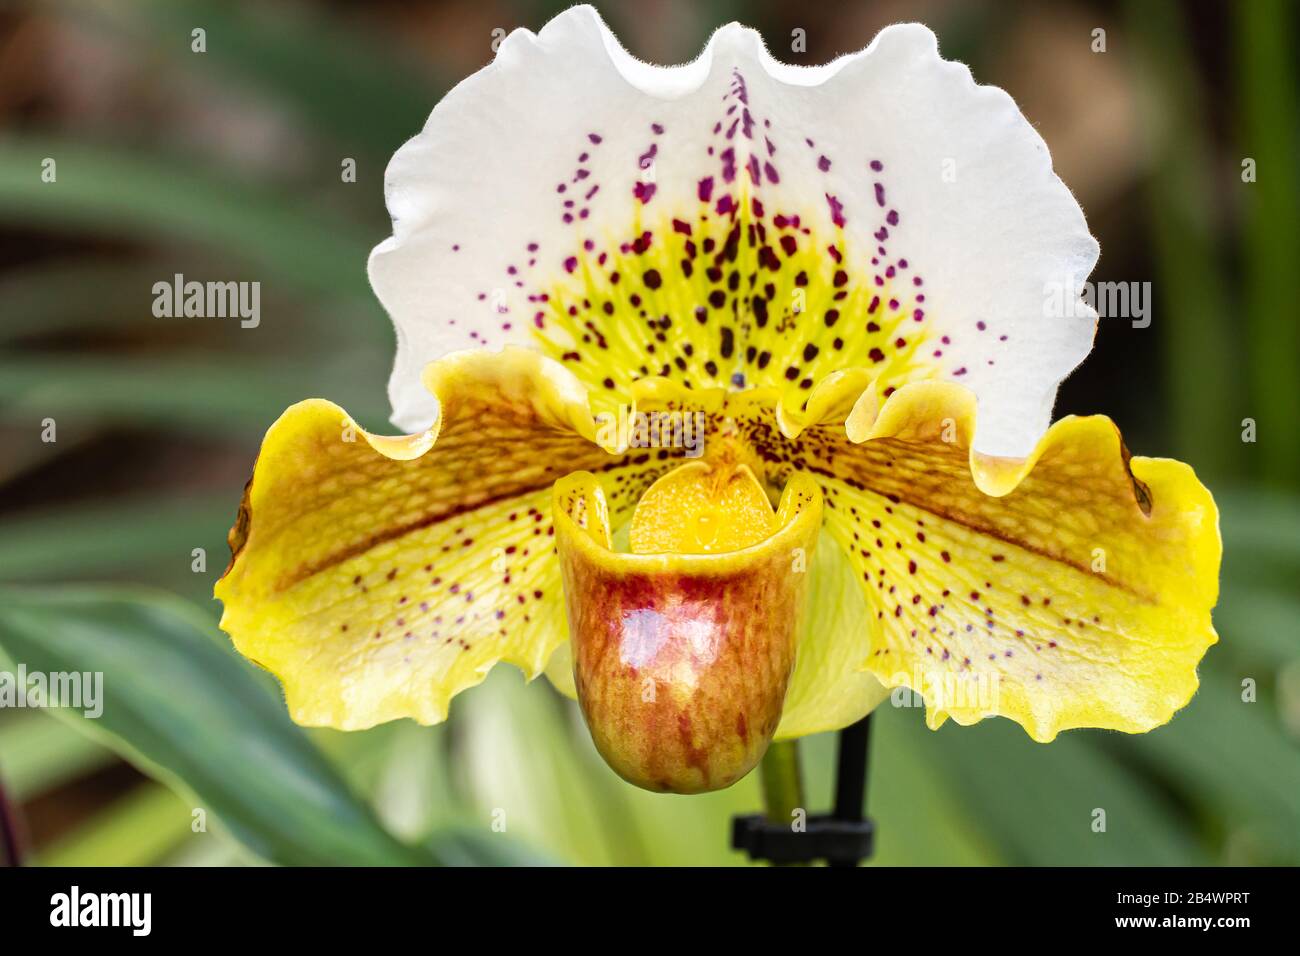 Beautiful Orchid Paphiopedilum flowers bloom in spring adorn the beauty of nature close up Stock Photo